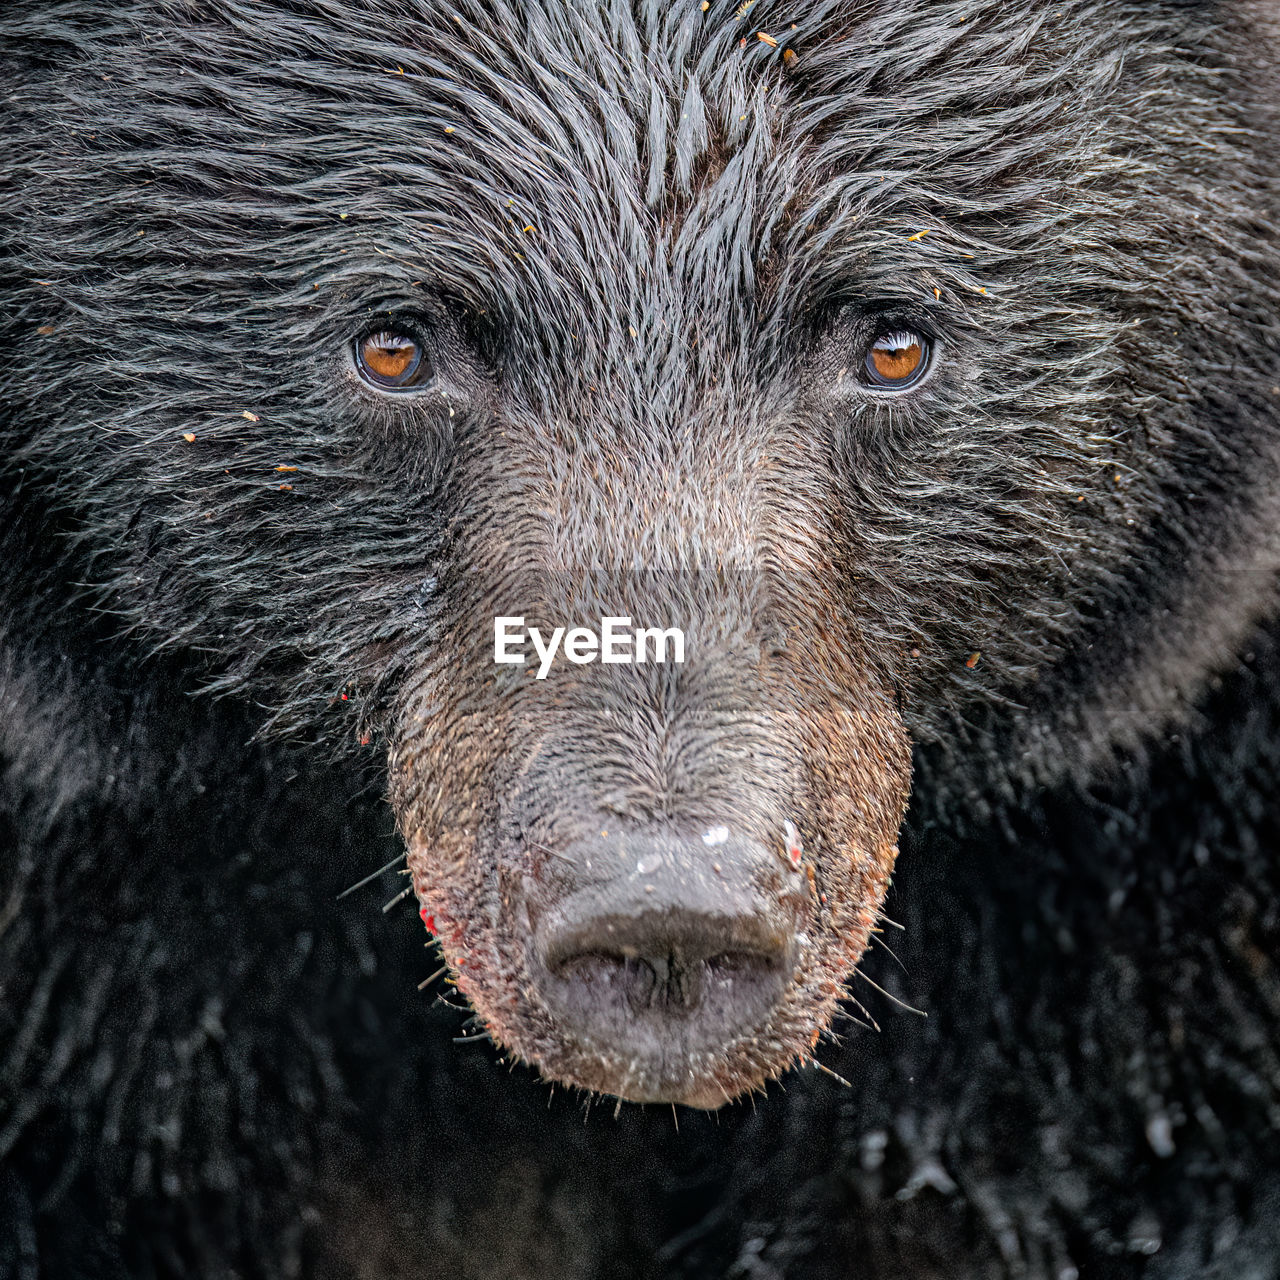 animal, animal themes, one animal, mammal, grizzly bear, animal wildlife, bear, wildlife, brown bear, animal body part, portrait, close-up, no people, animal head, looking at camera, nature, outdoors, snout, black, carnivore